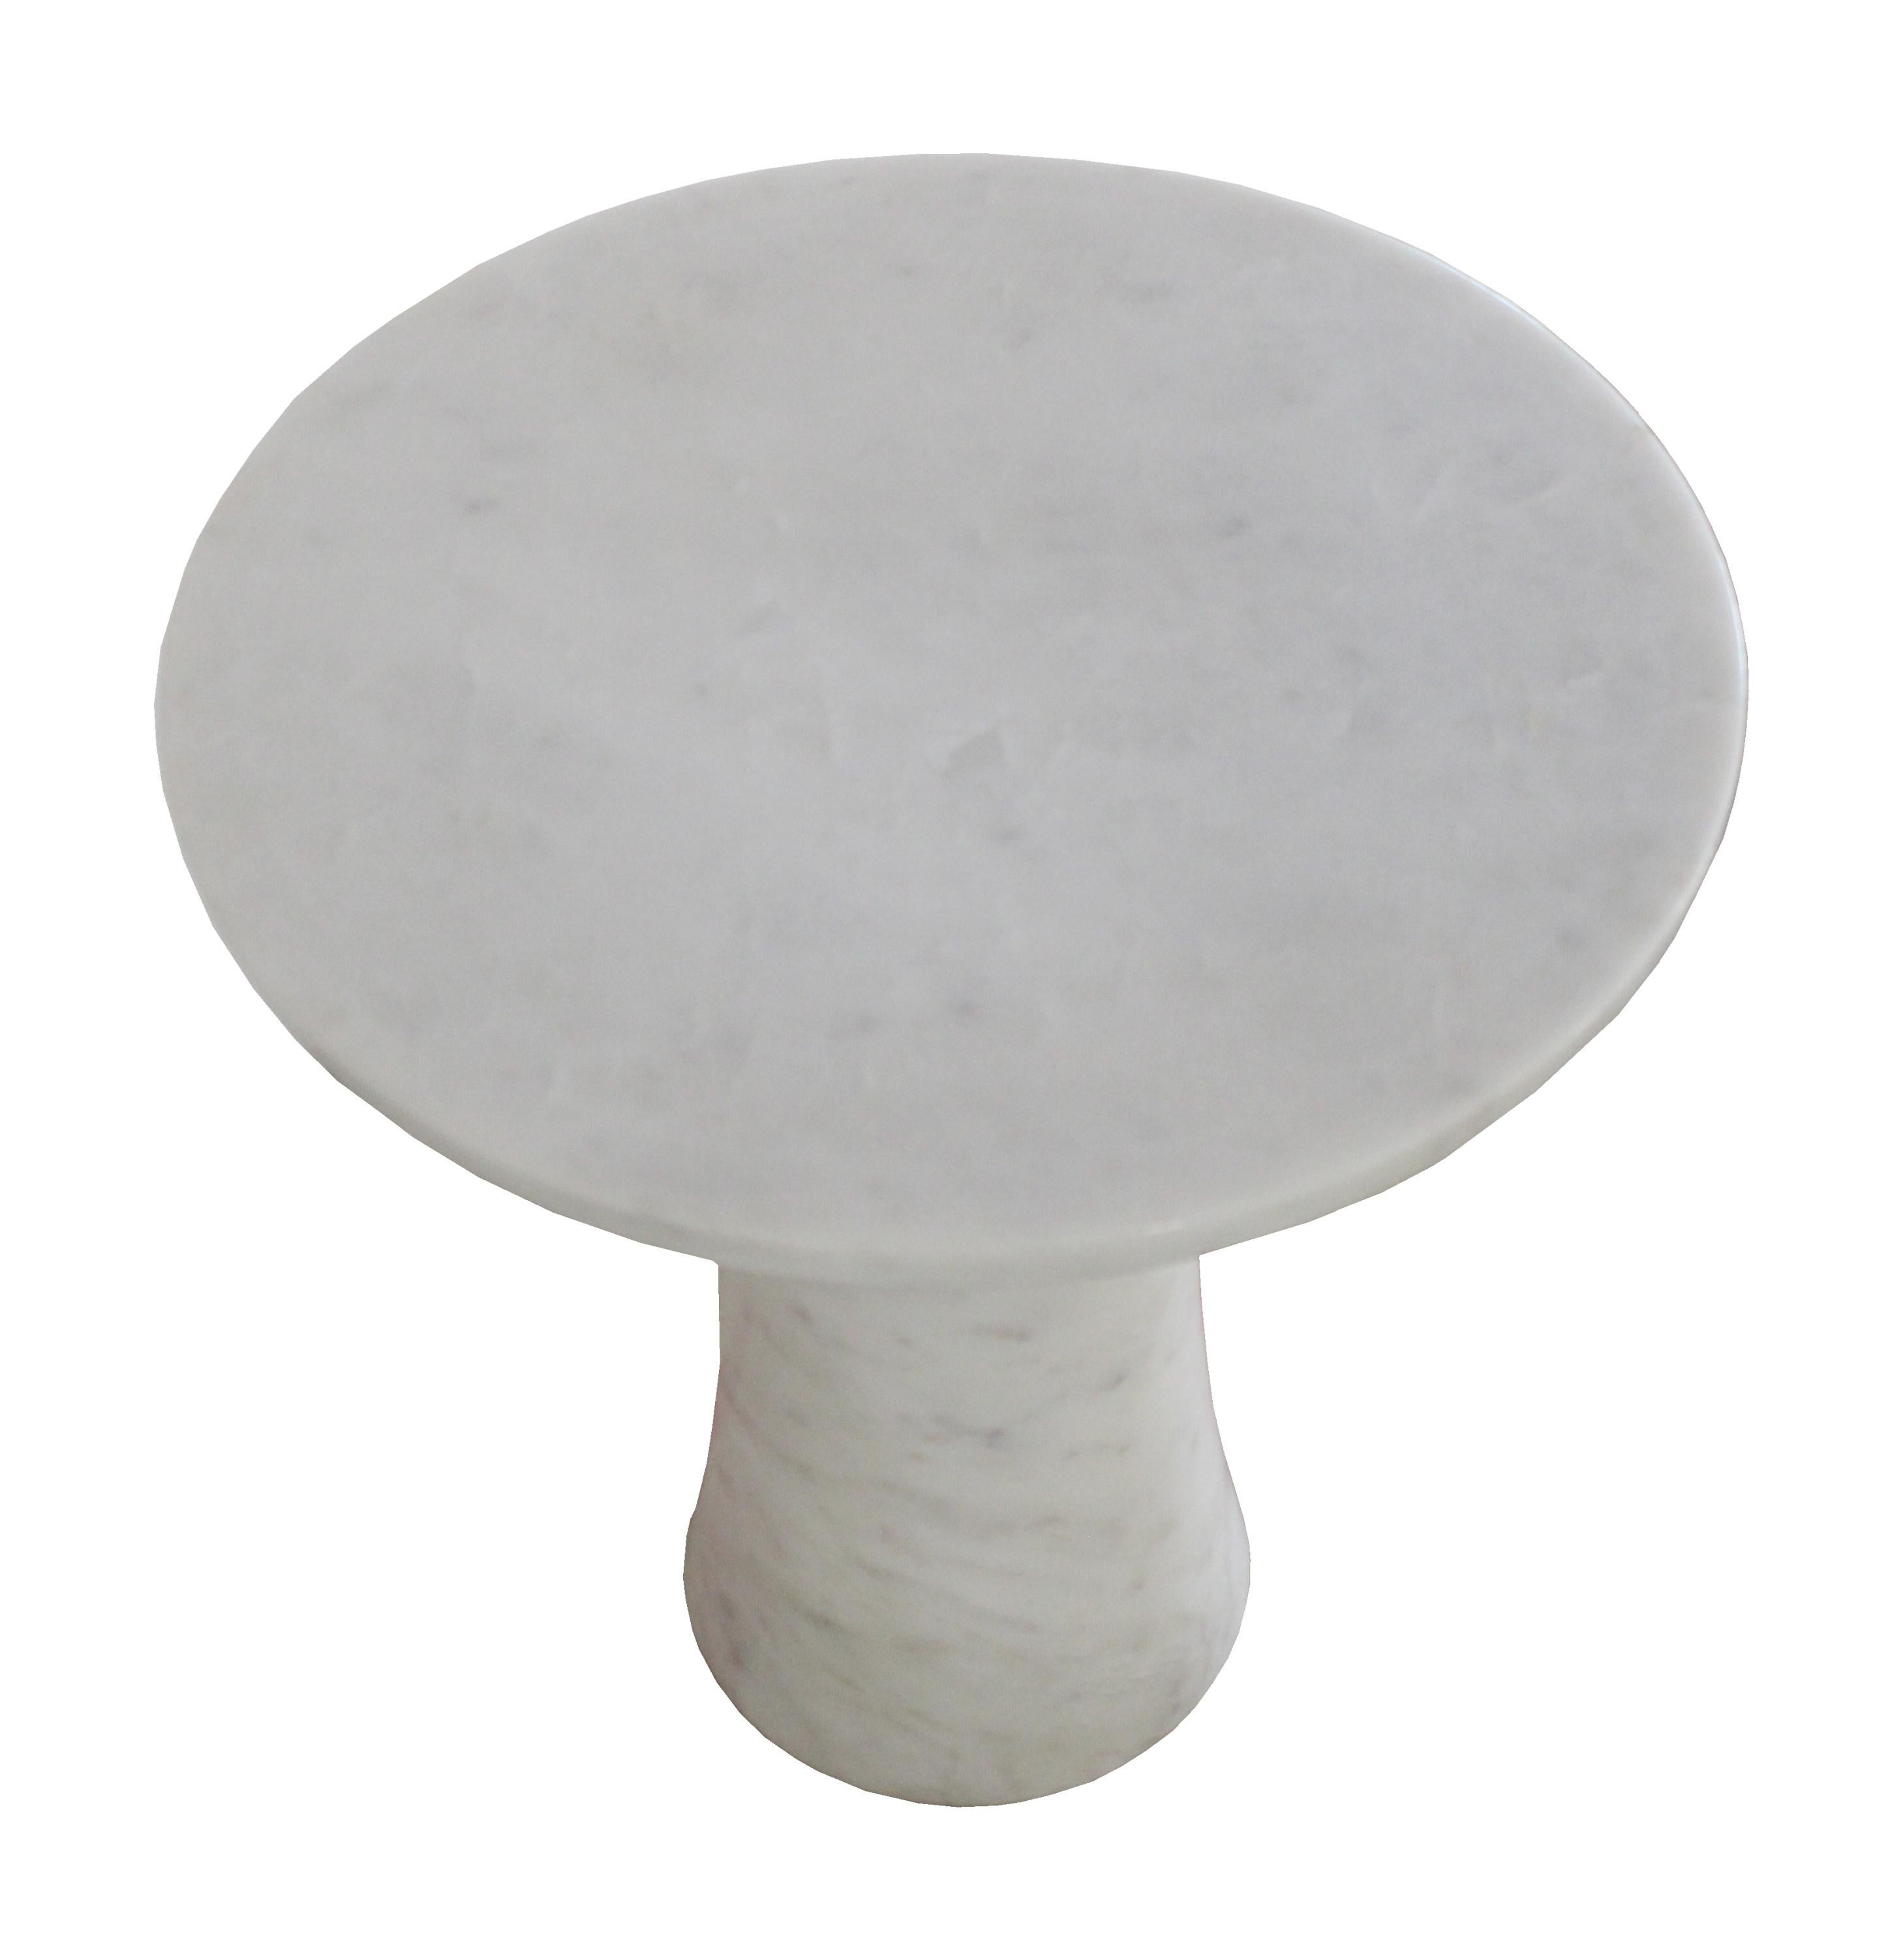 One of the most simple, clean and versatile design from the collection of Stephanie Odegard. Tabla Table in White Marble by Paul Mathieu for Stephanie Odegard goes well with any surrounding whether Mid-Century Modern, Contemporary, Modern or